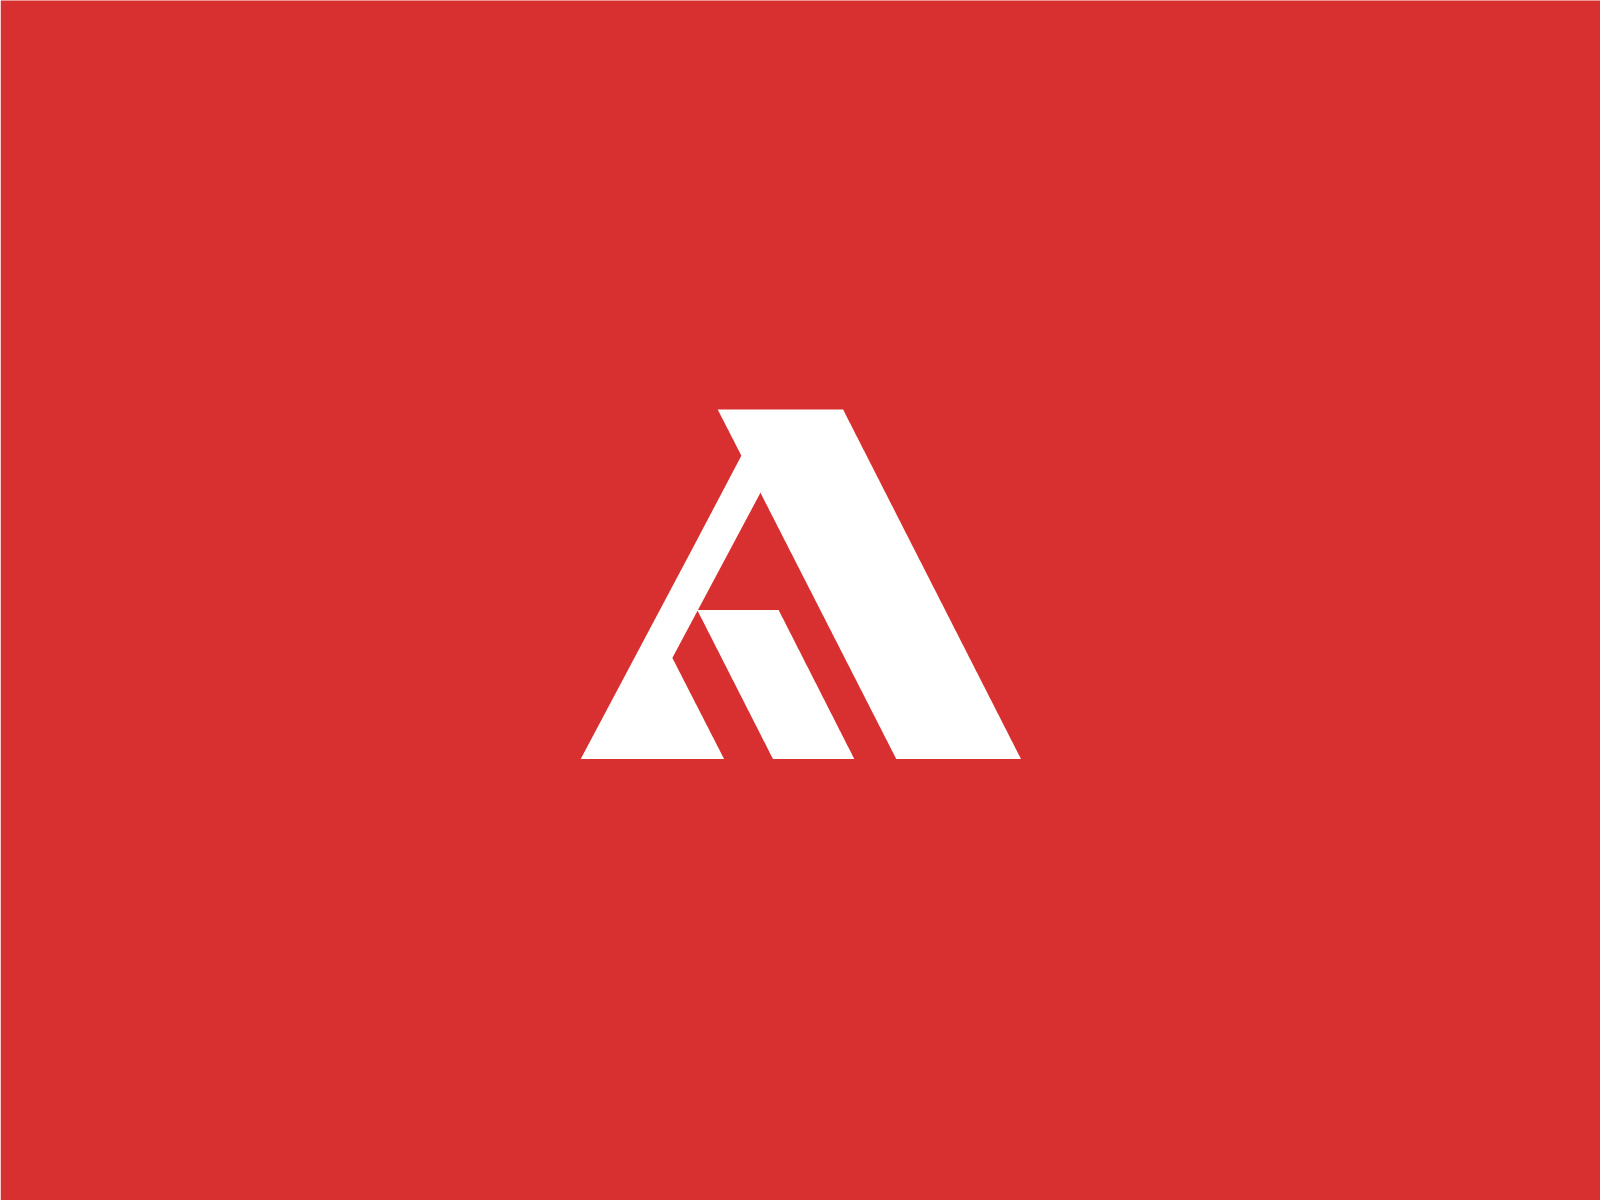 ACN - Capital Venture Brand Identity by Jahid Hasan on Dribbble